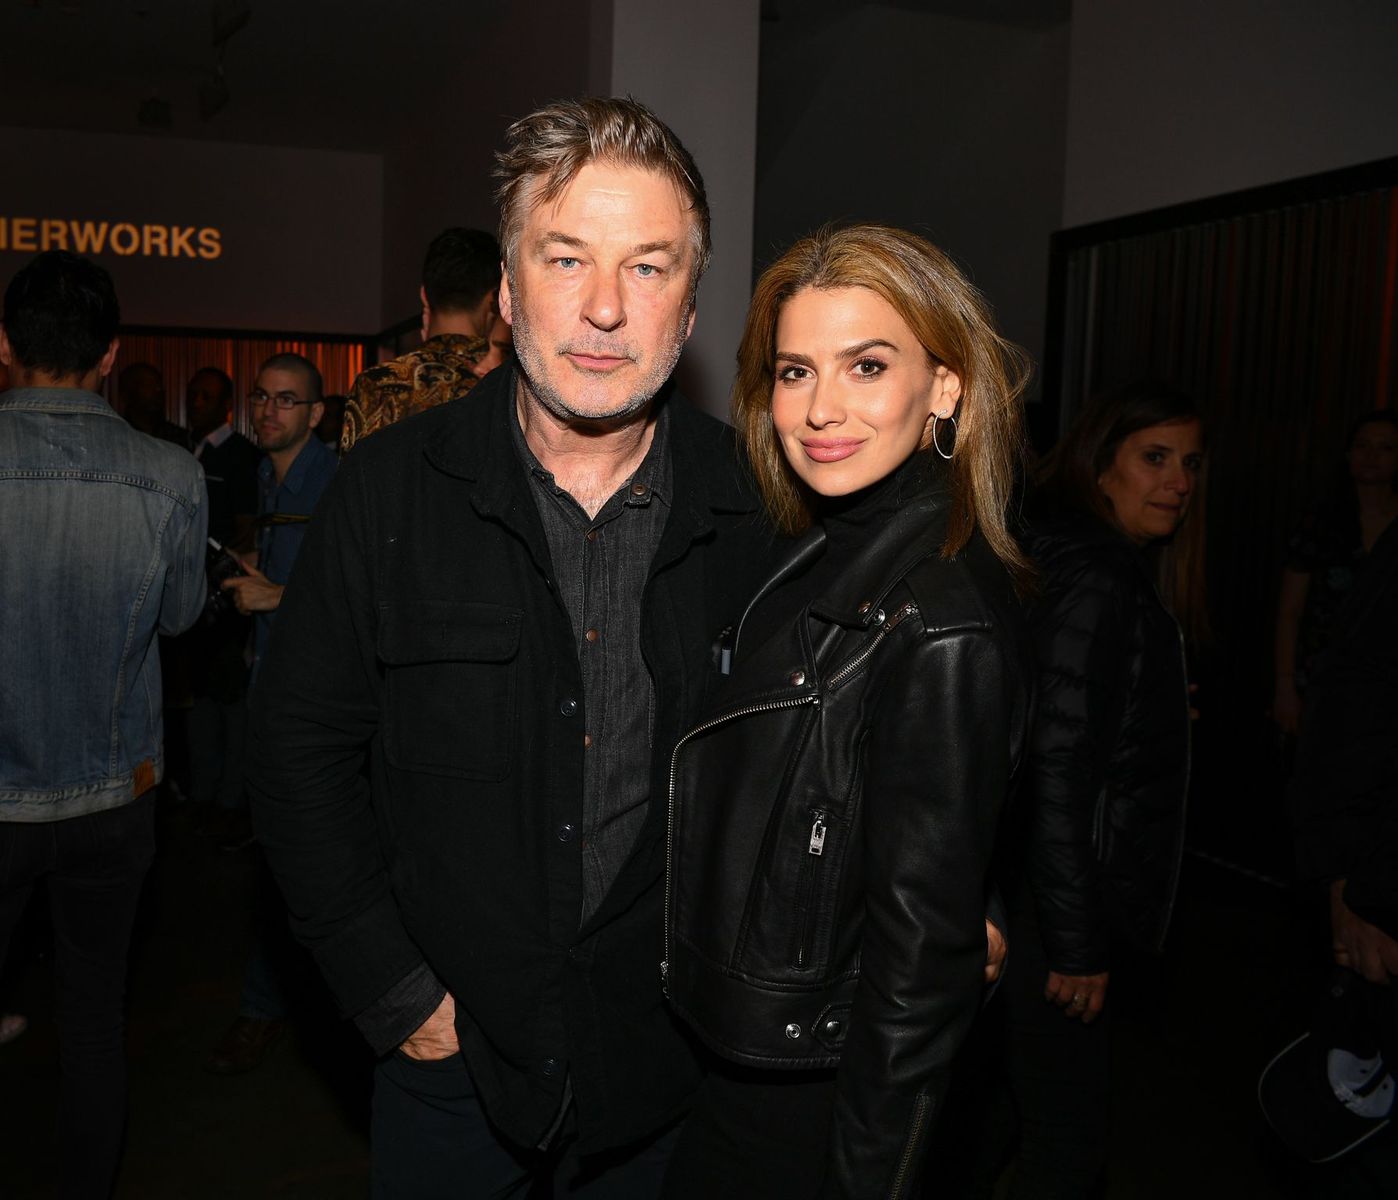 Alec and Hilaria Baldwin at the Tribeca Film Festival After-Party on April 26, 2019, in New York City | Photo: Dave Kotinsky/Getty Images